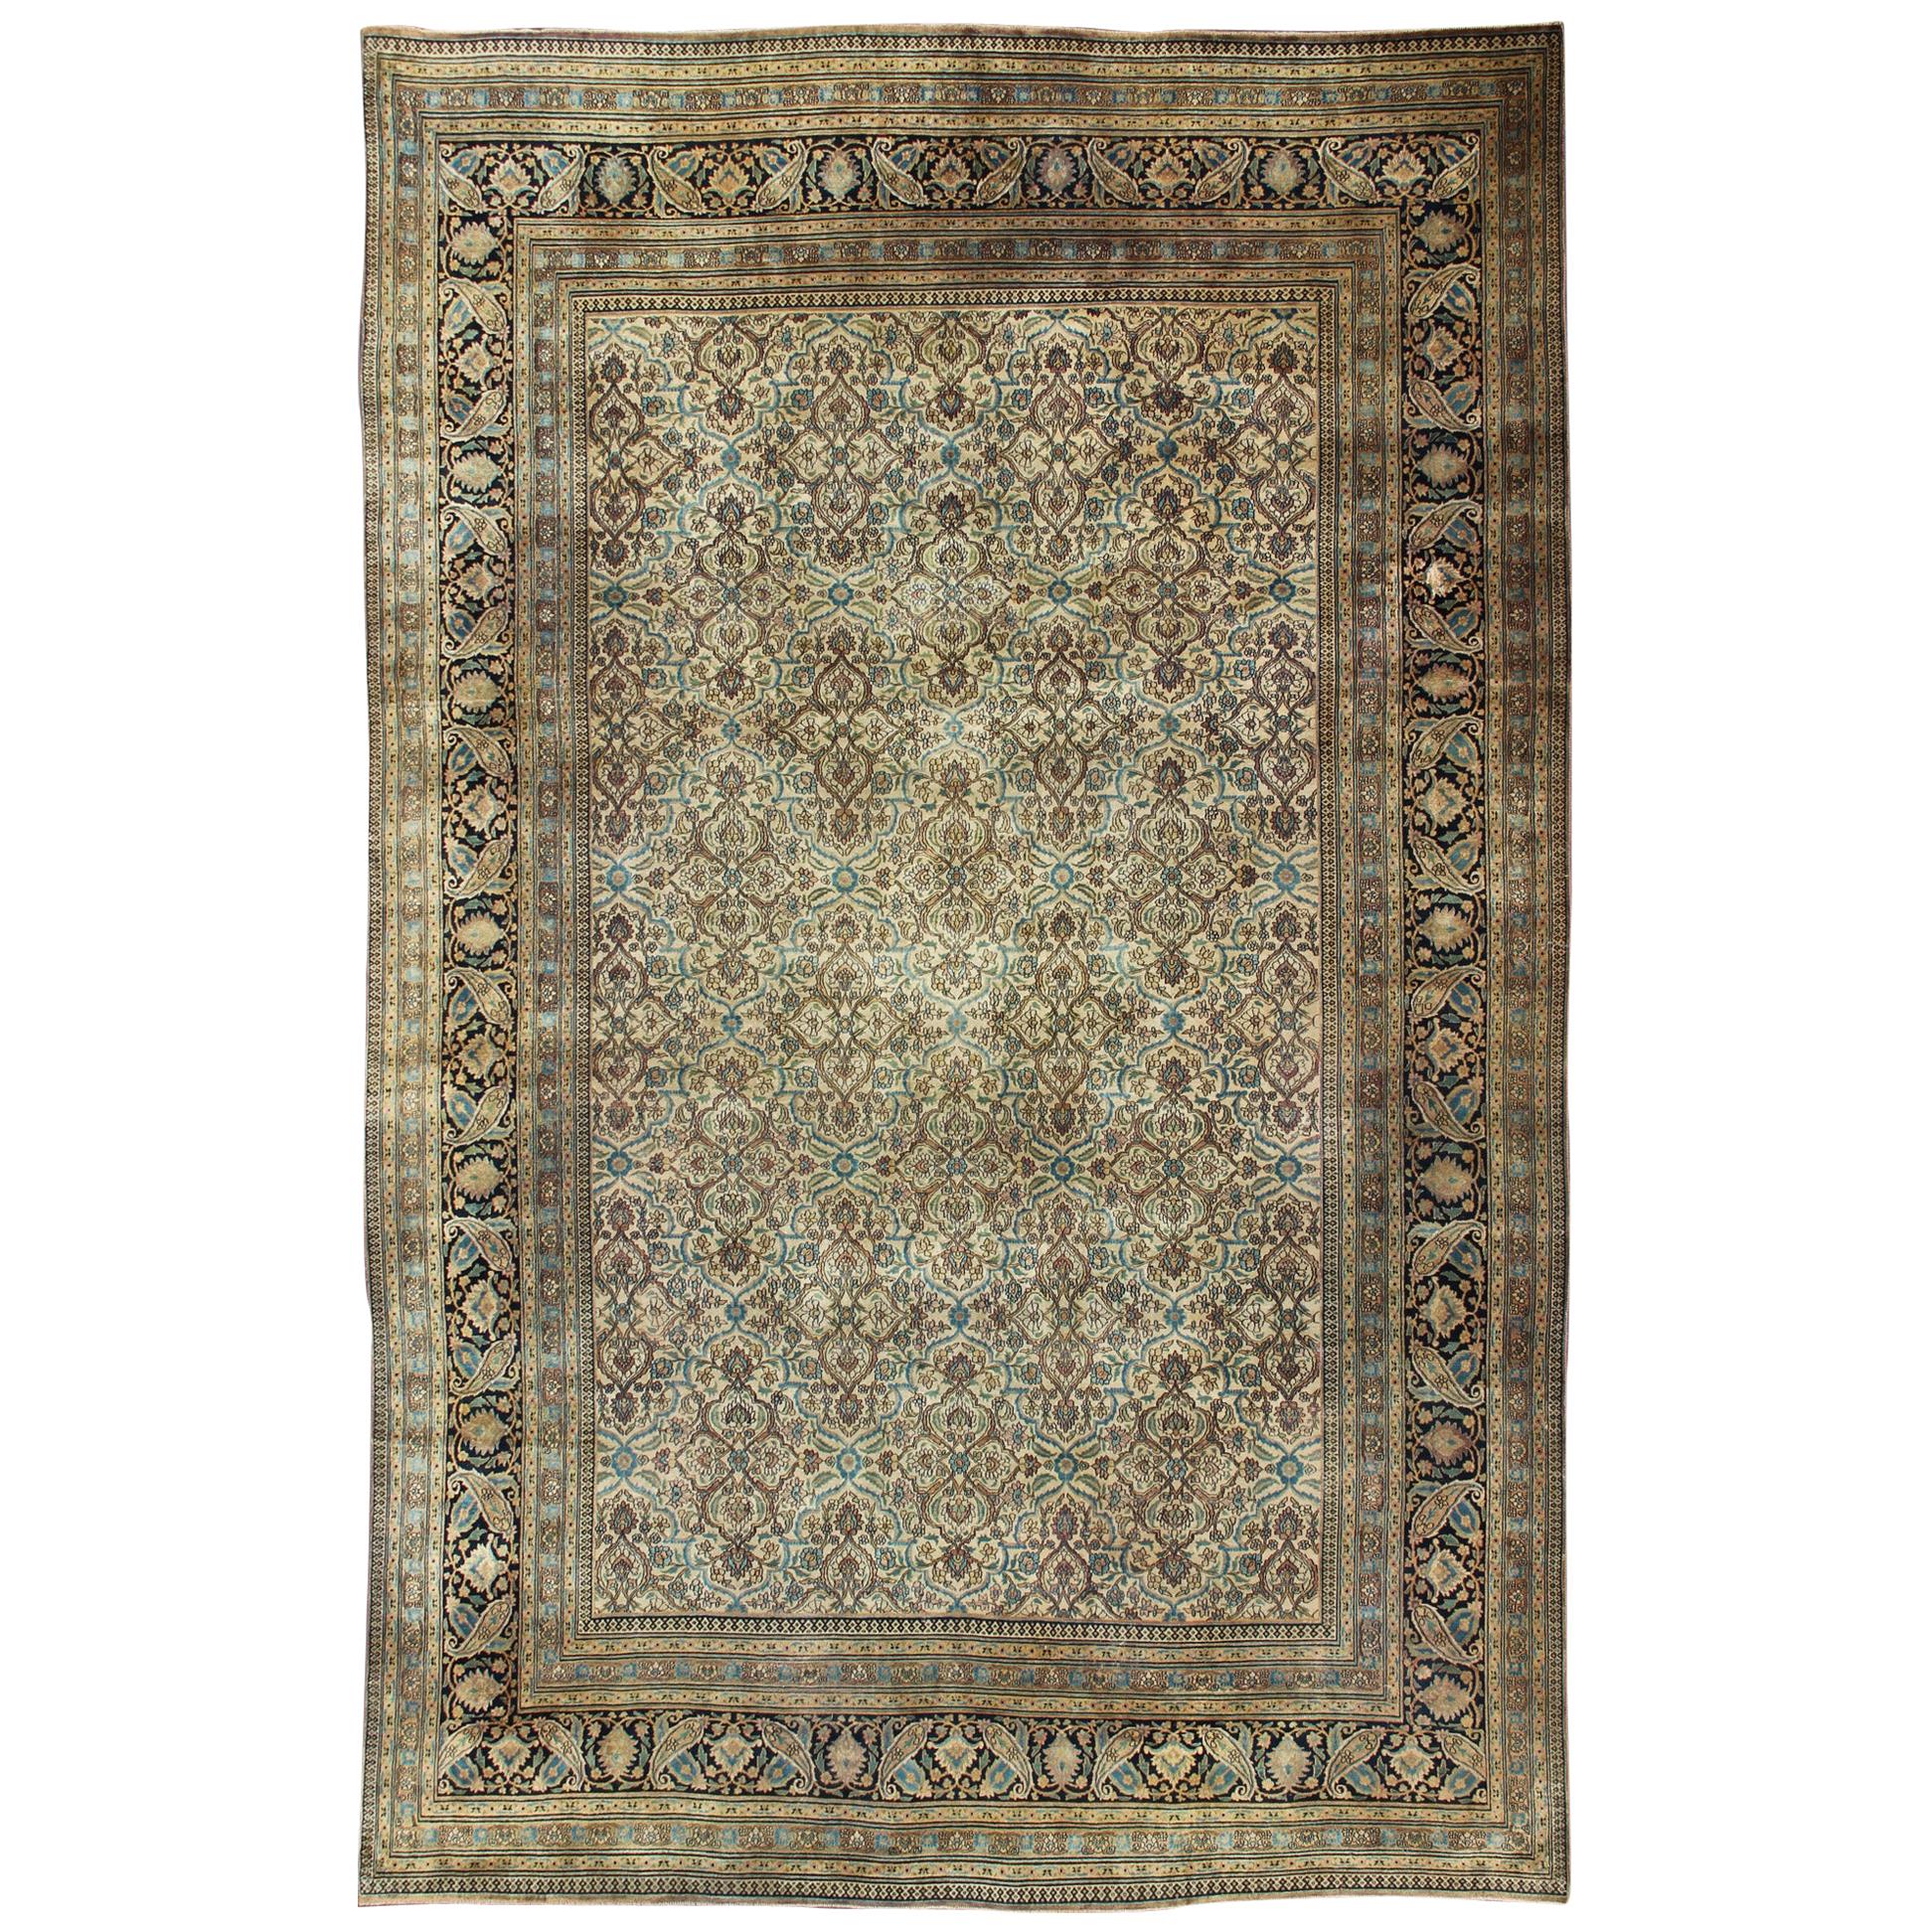 Large Antique Persian Khorassan with All-Over Botanical Design 